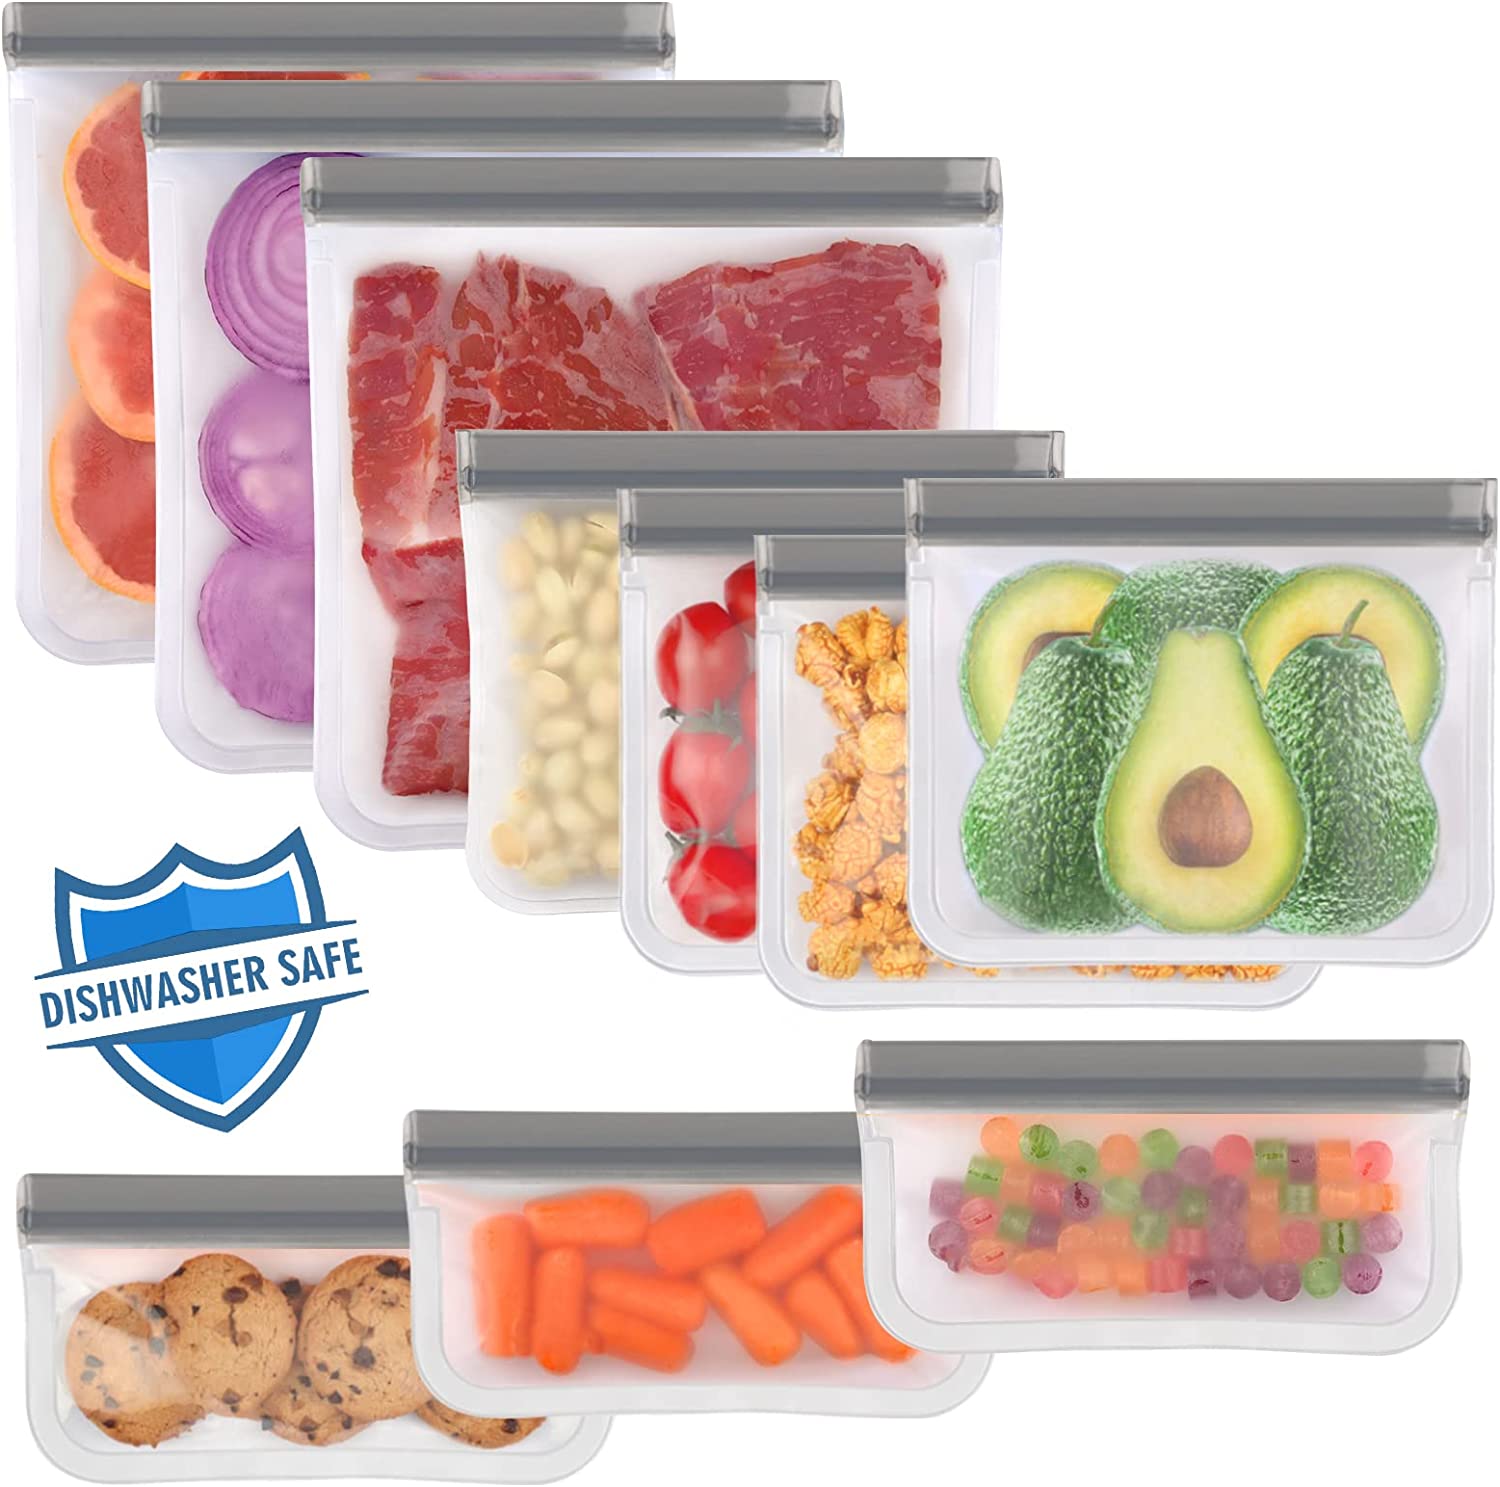 12pcs Reusable Stand-up Food Storage Bags, Fda-grade Reusable Sandwich Bags,  3pcs Reusable Gallon Bags+4pcs Reusable Freezer Bags+5pcs Reusable Bags For  Meat, Fruit, Cereal, Snacks